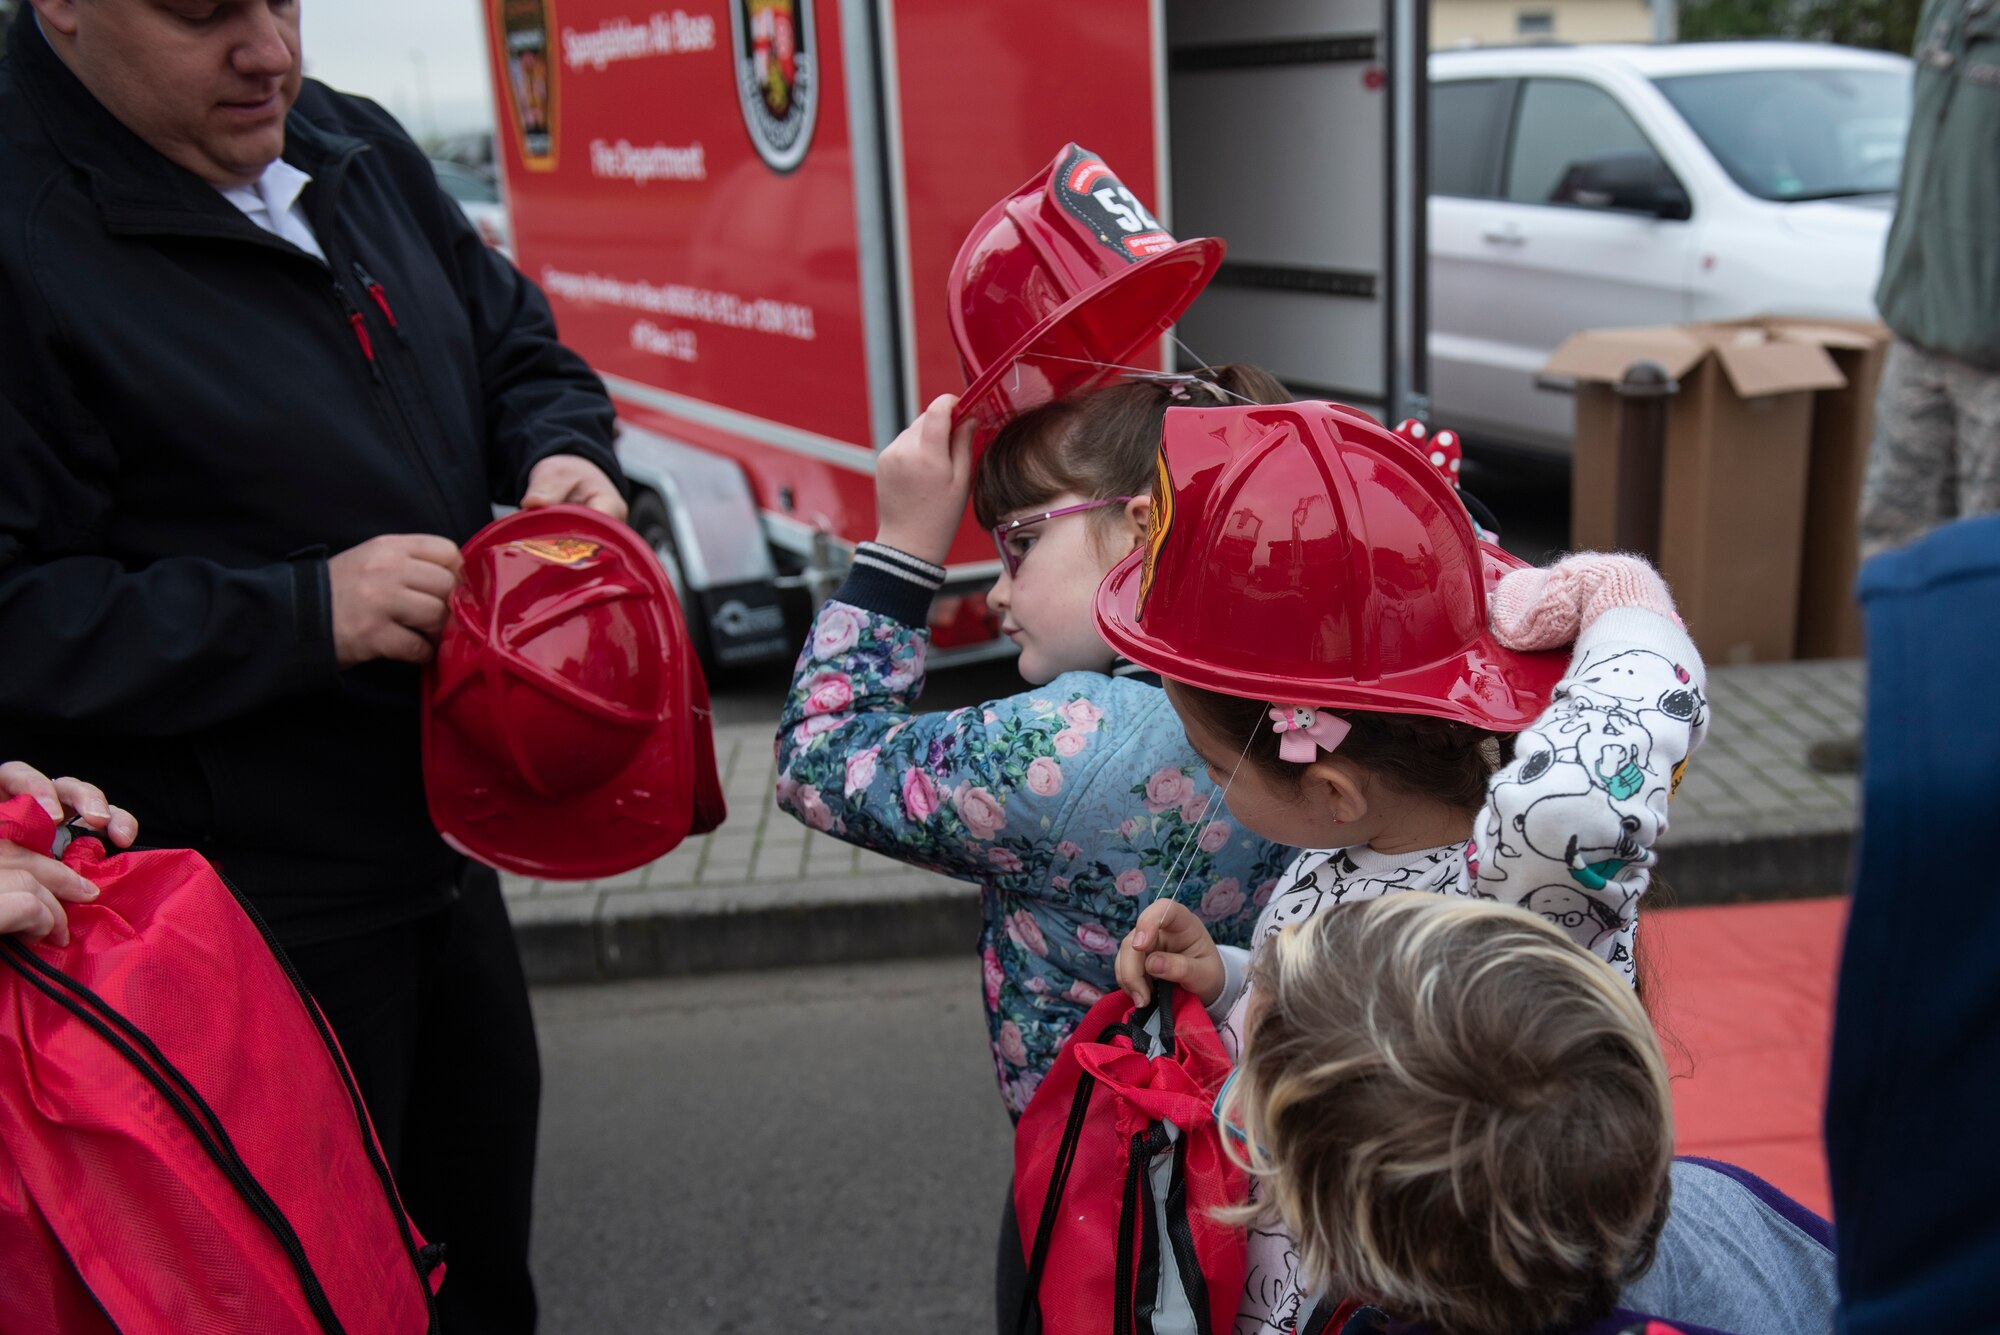 Spangdahlem Elementary School students receive commemorative 52nd Civil Engineer Squadron firefighter helmets for Fire Prevention Week at Spangdahlem Air Base, Germany, Oct. 23, 2019. Students were able to try on gear, sit in a fire truck, and practice calling the fire department in case of a fire. (U.S. Air Force photo by Airman 1st Class Alison Stewart)